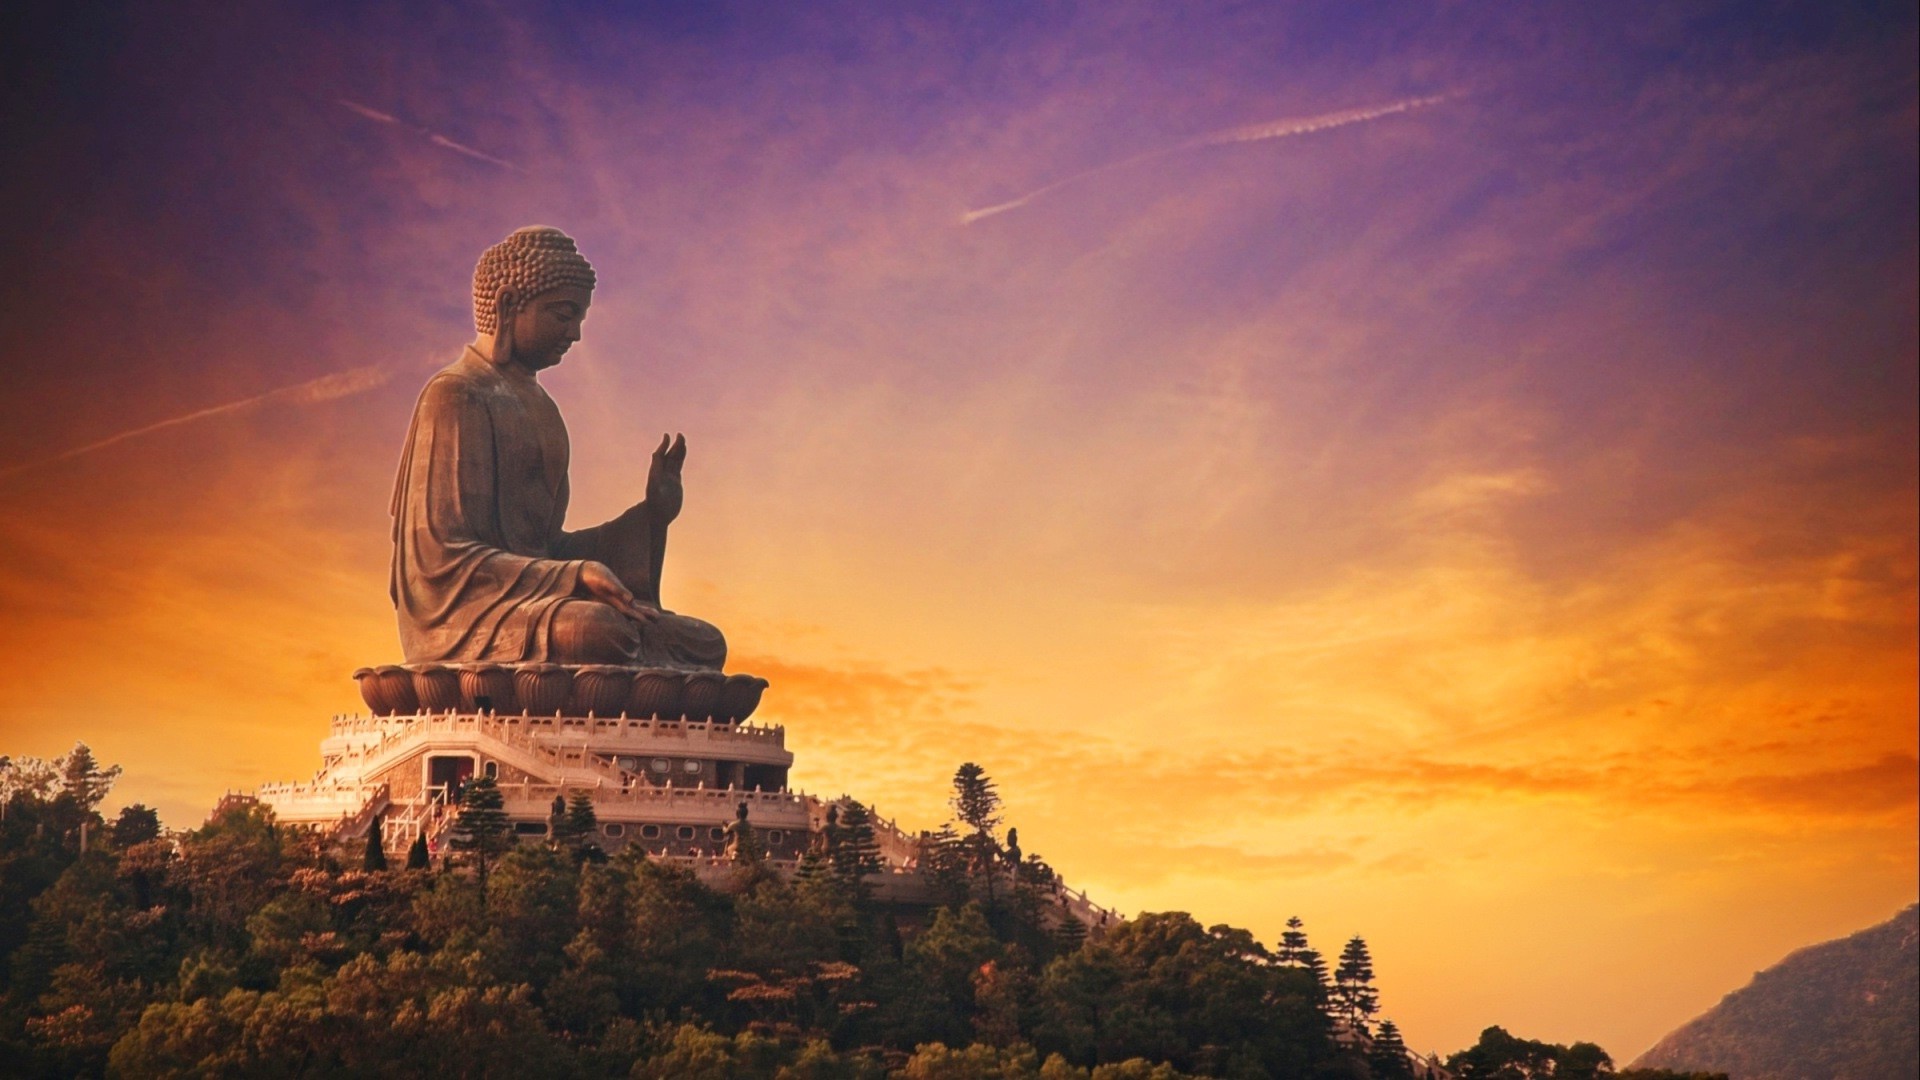 The biggest lord Buddha statue wallpapers